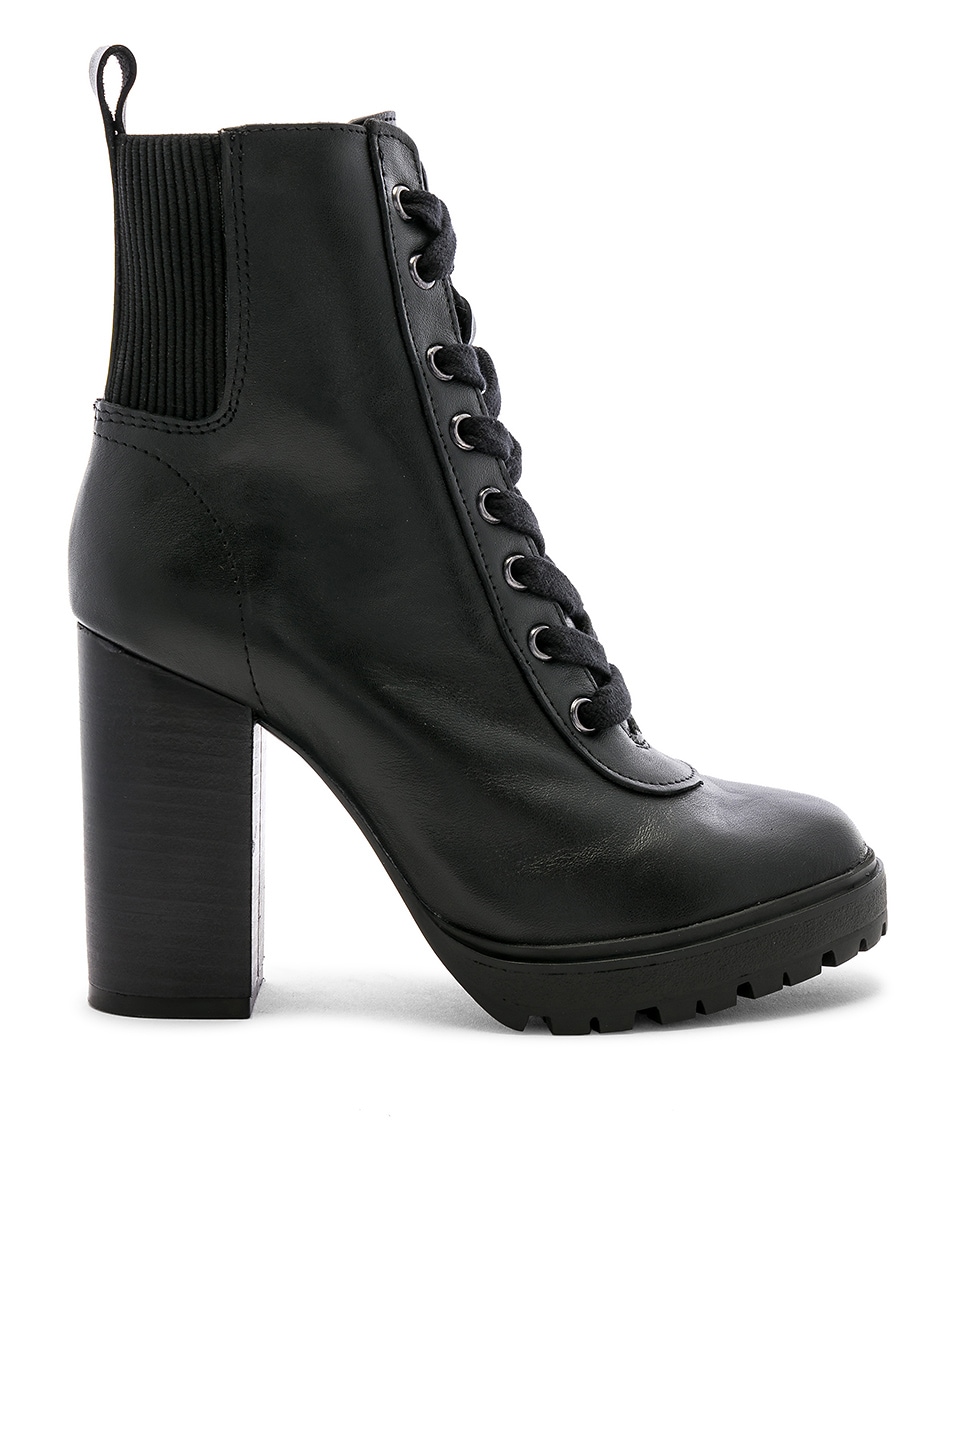 latch black leather boots